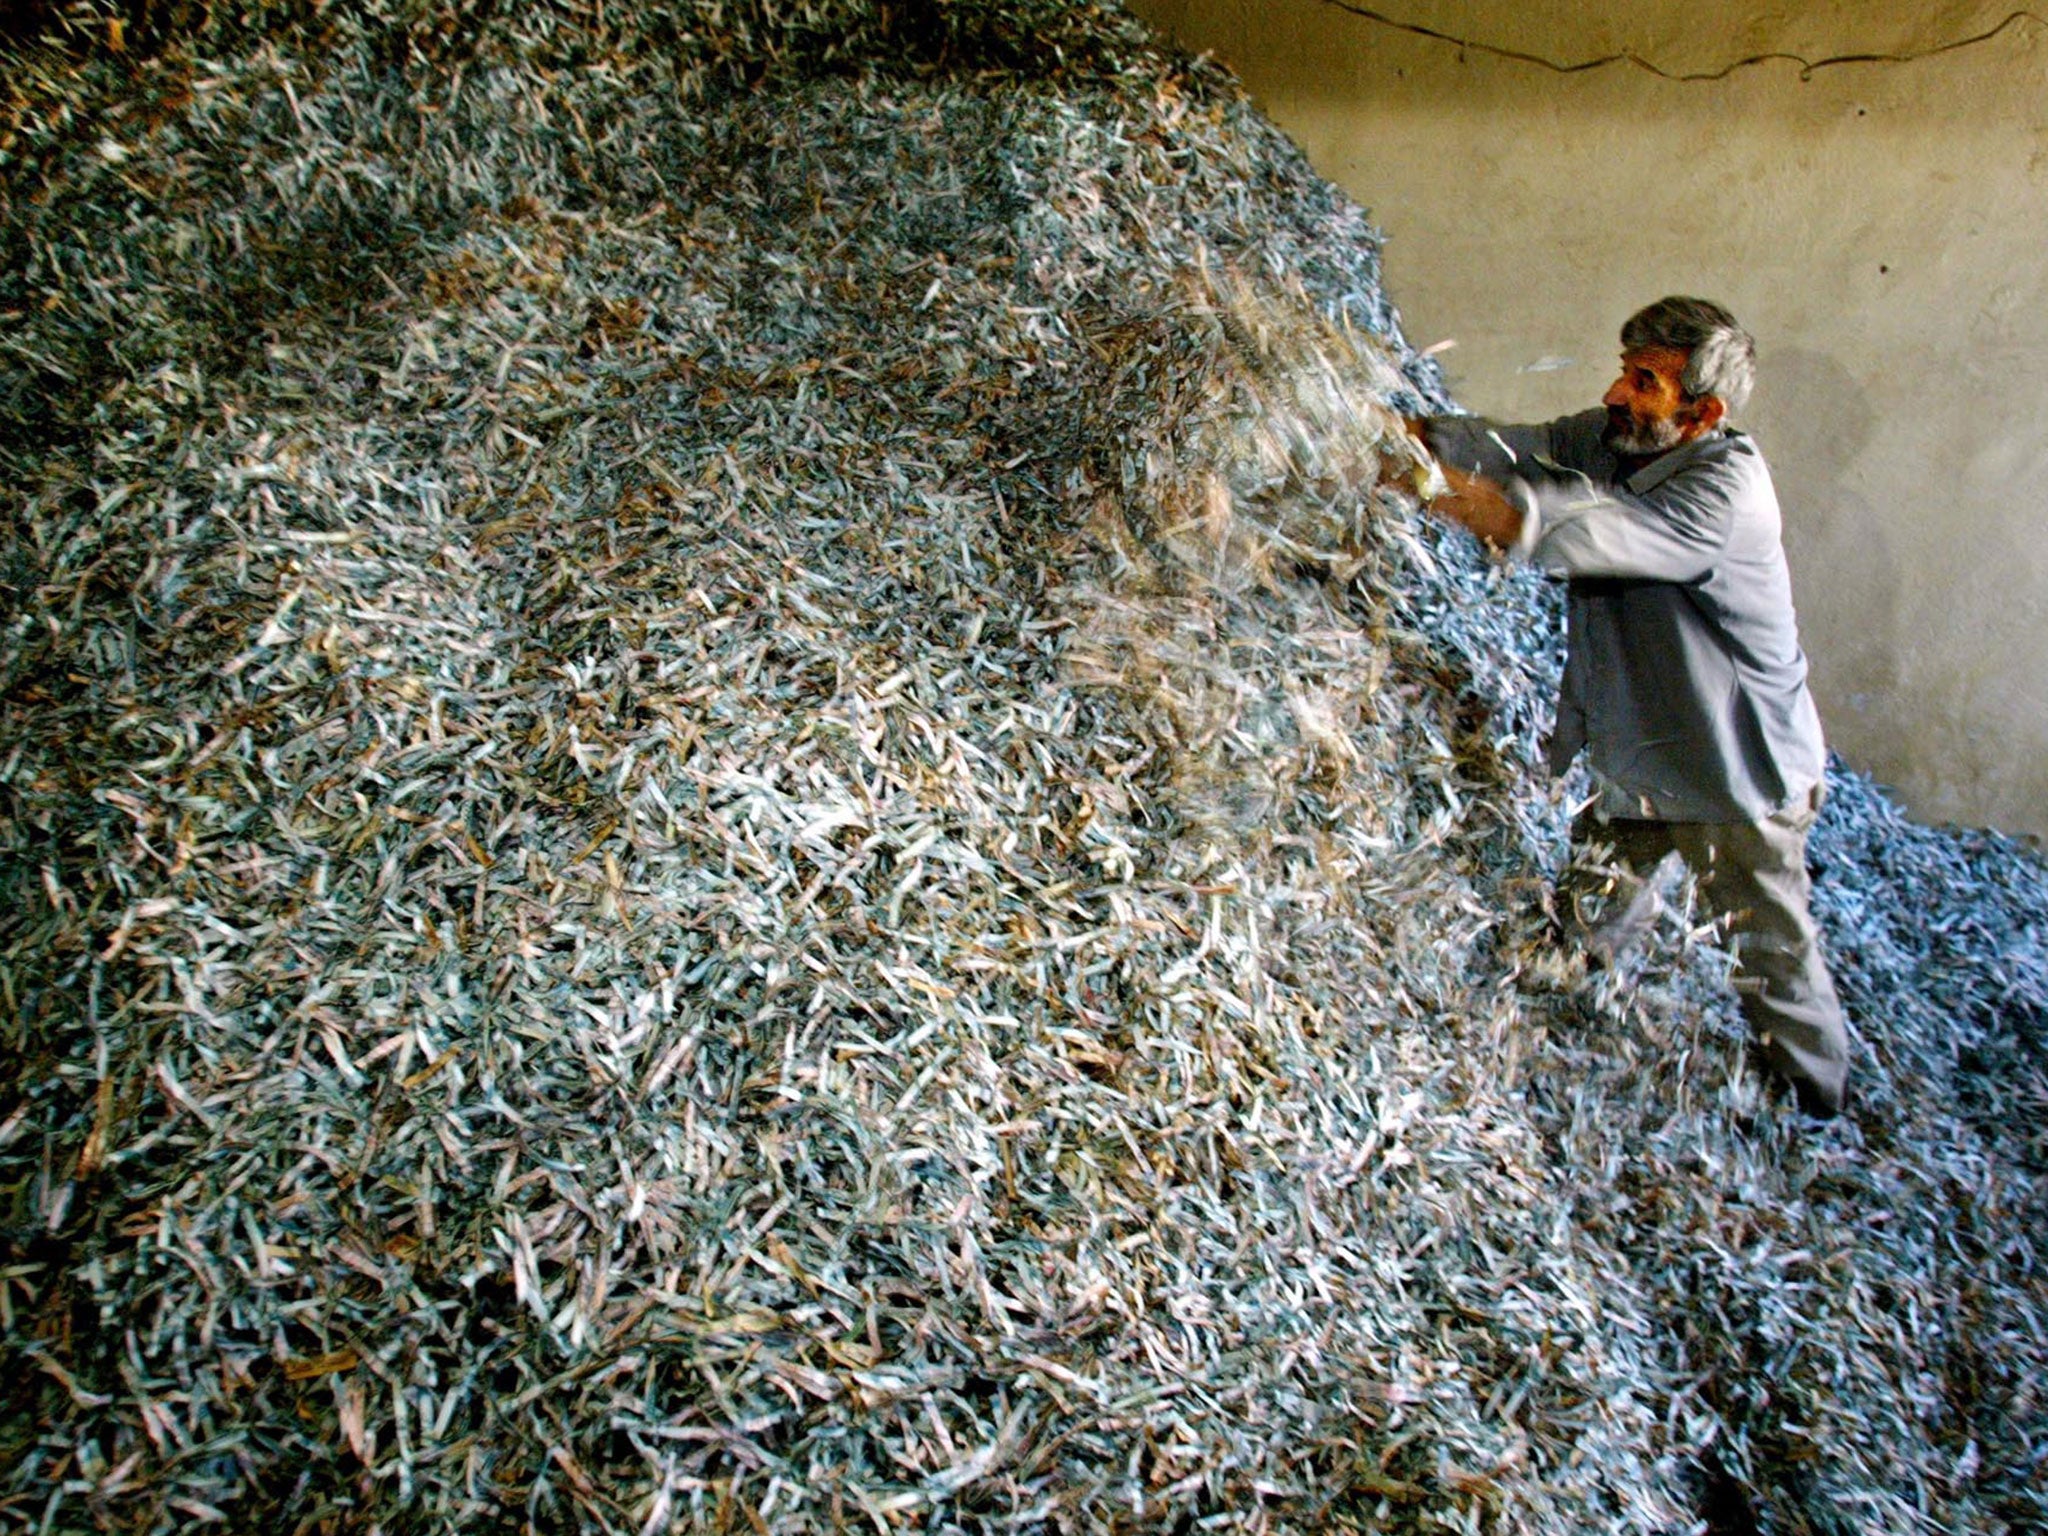 Paper mountain: a bank worker sifts through old Afghan currency shredded in Kabul in 2002 when the country’s monetary system was modernised